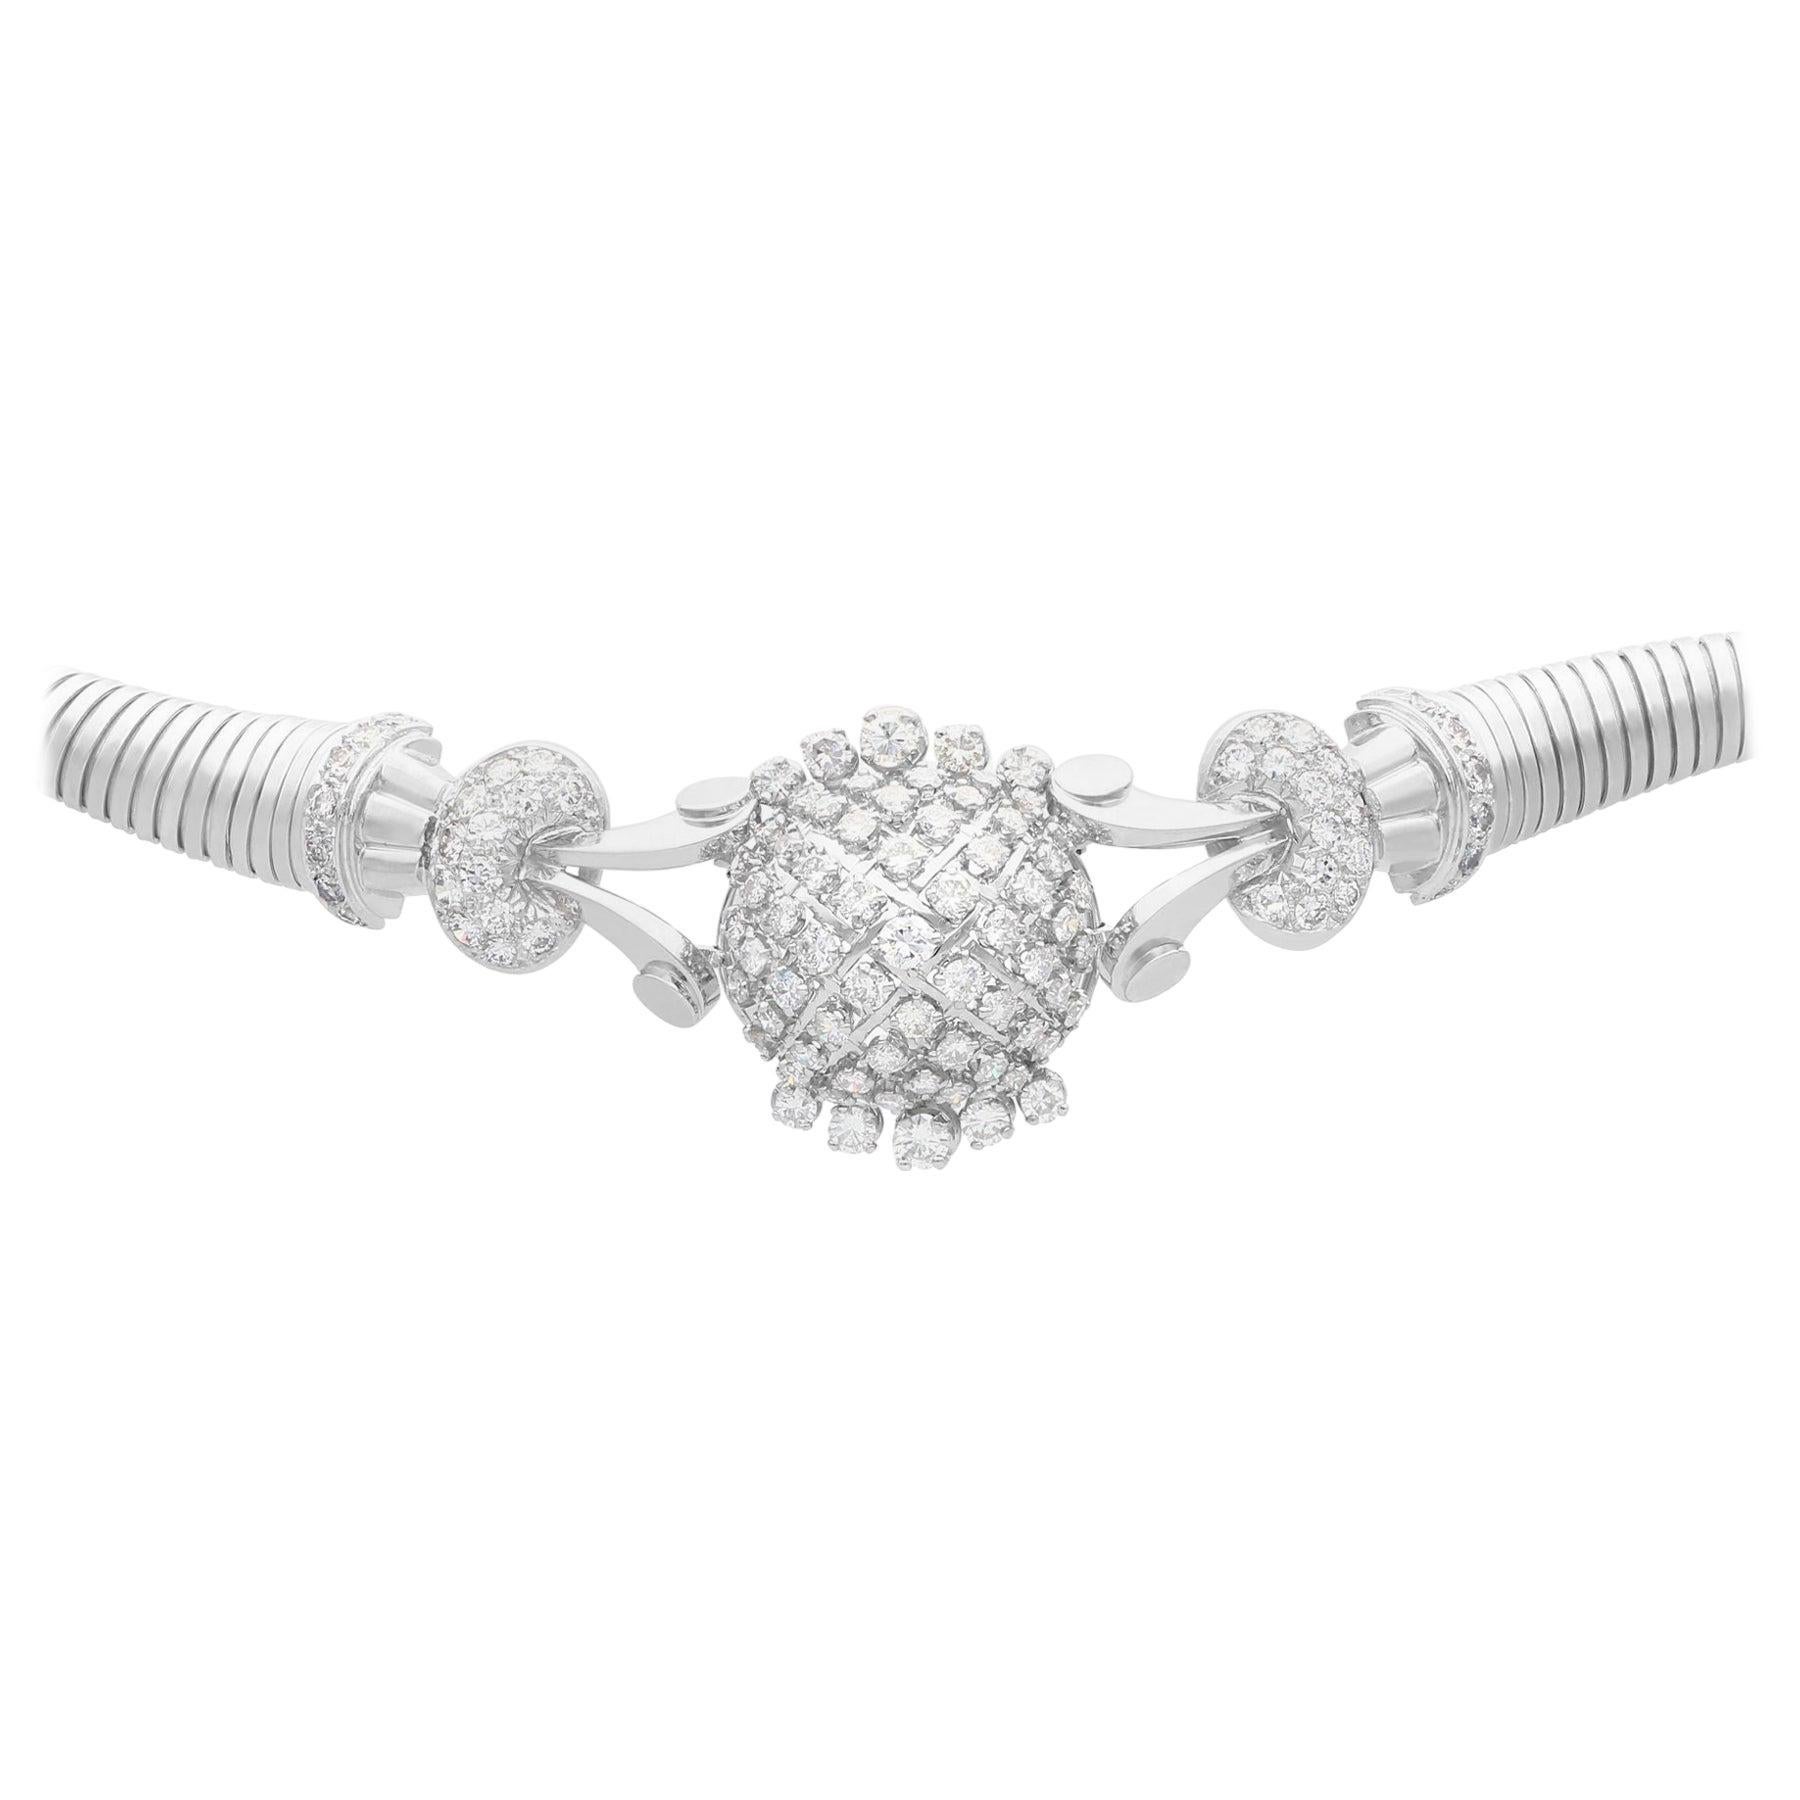 French Art Deco 6.68 Carat Diamond and White Gold Necklace Bracelet For Sale